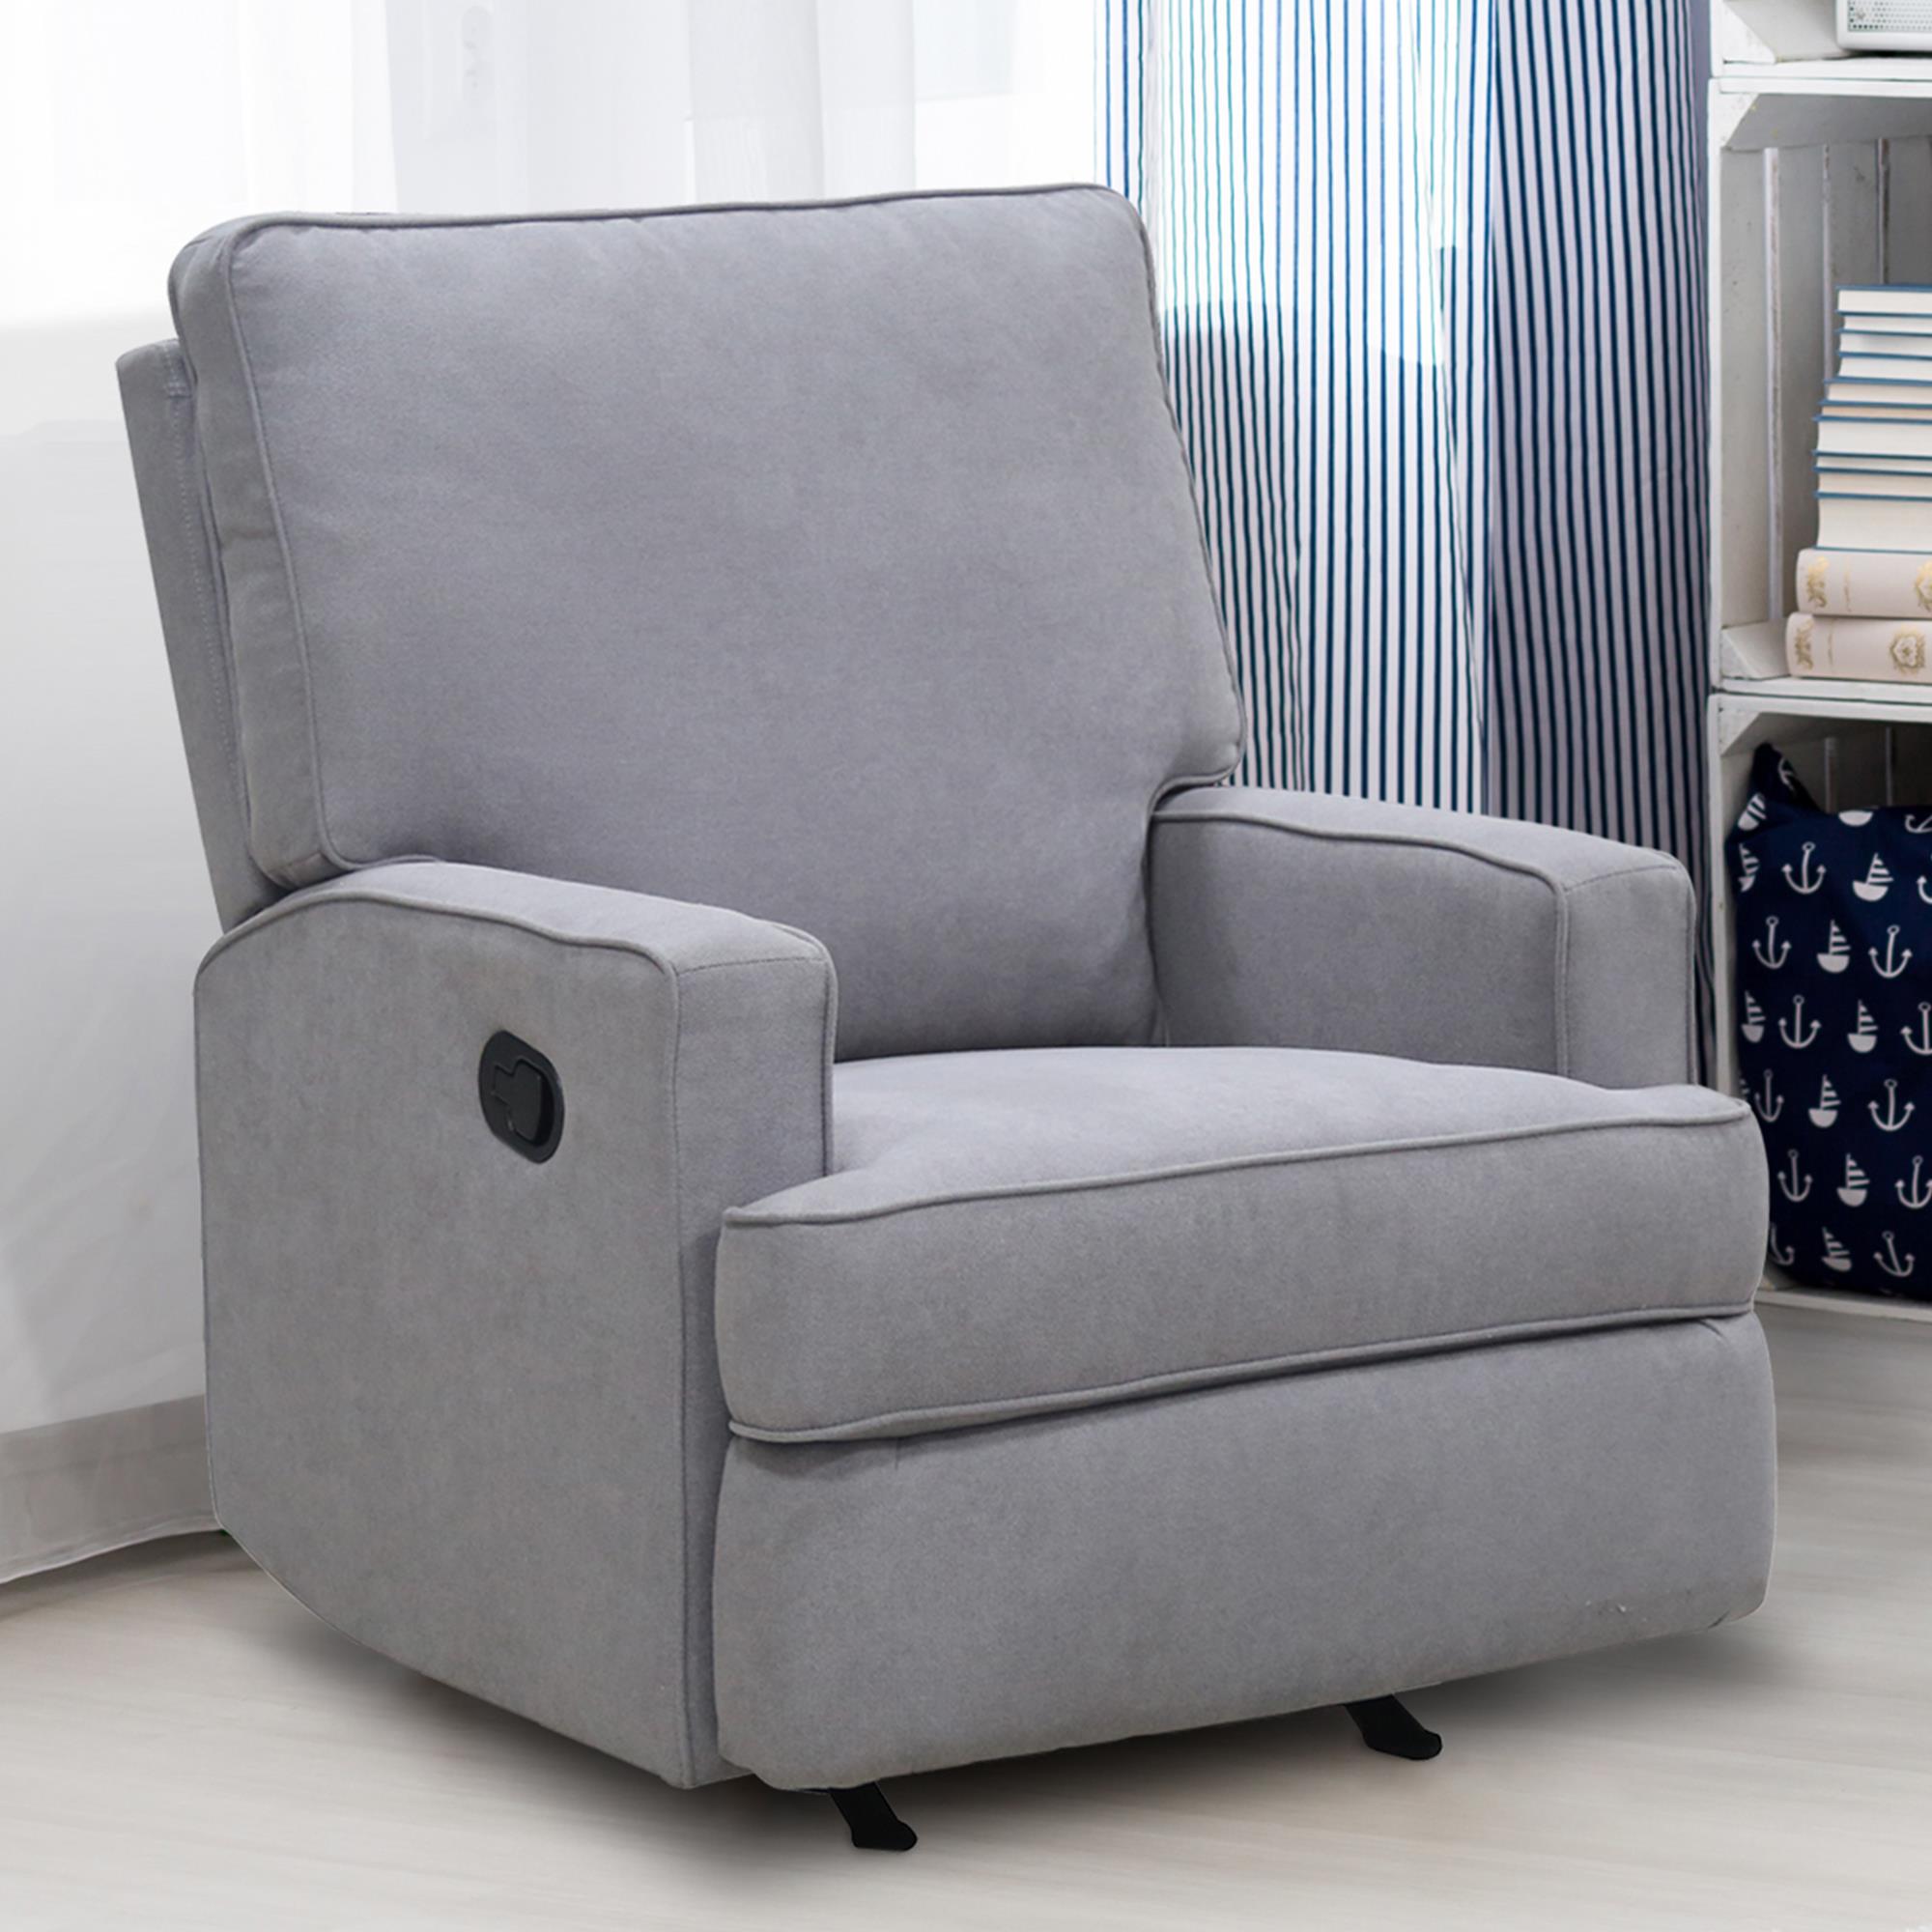 Baby Relax Salma Rocker Recliner Chair, Gray Chenille - image 1 of 15